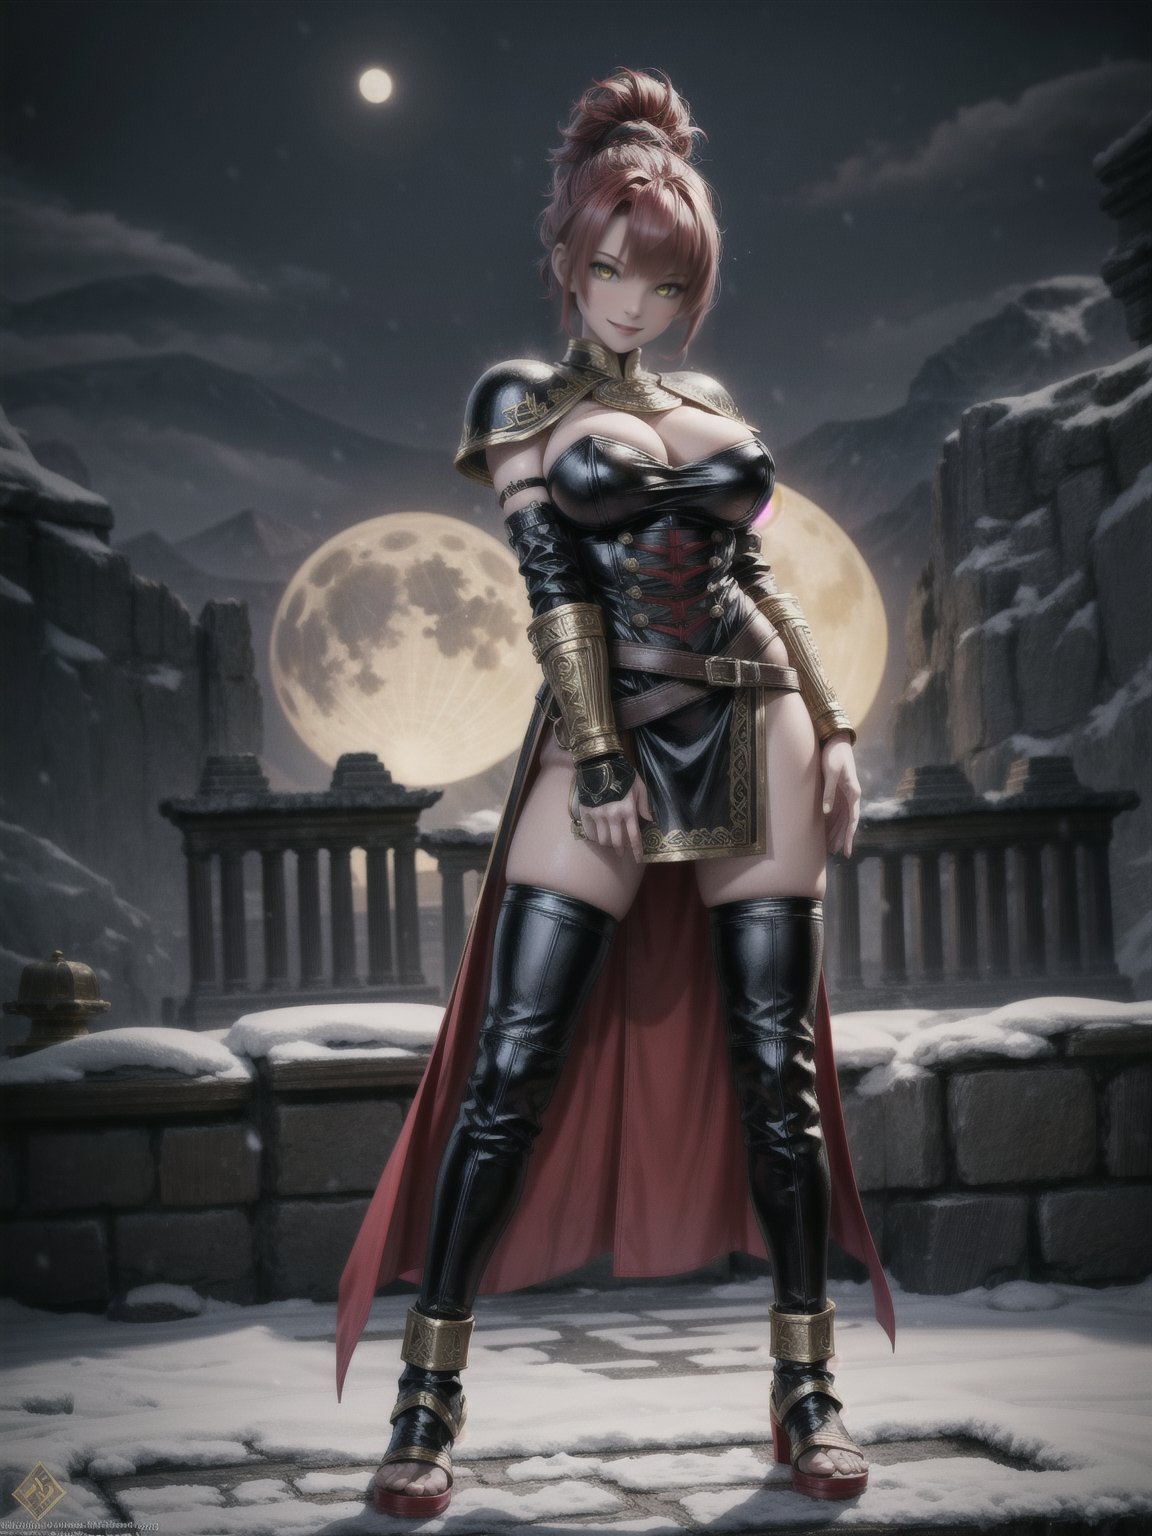 1woman, black armor with golden props, leather skirt with golden props, tight clothing on the body and erotic, absurdly giant breasts, red hair, mohawk hair, extremely short hair, hair with ponytail, hair with bangs in front of the eyes, helmet on the head, looking at the viewer, (((erotic pose interacting and leaning on something))), in an Arcadian temple with large figurines, sculptures, altars, pedestals, mountain background, snowing hard, at night, full moon top left, ((God of War)), ((full body):1.5), 16k, UHD, best possible quality, ((ultra detailed):1), best possible resolution, Unreal Engine 5, professional photography, perfect_hands